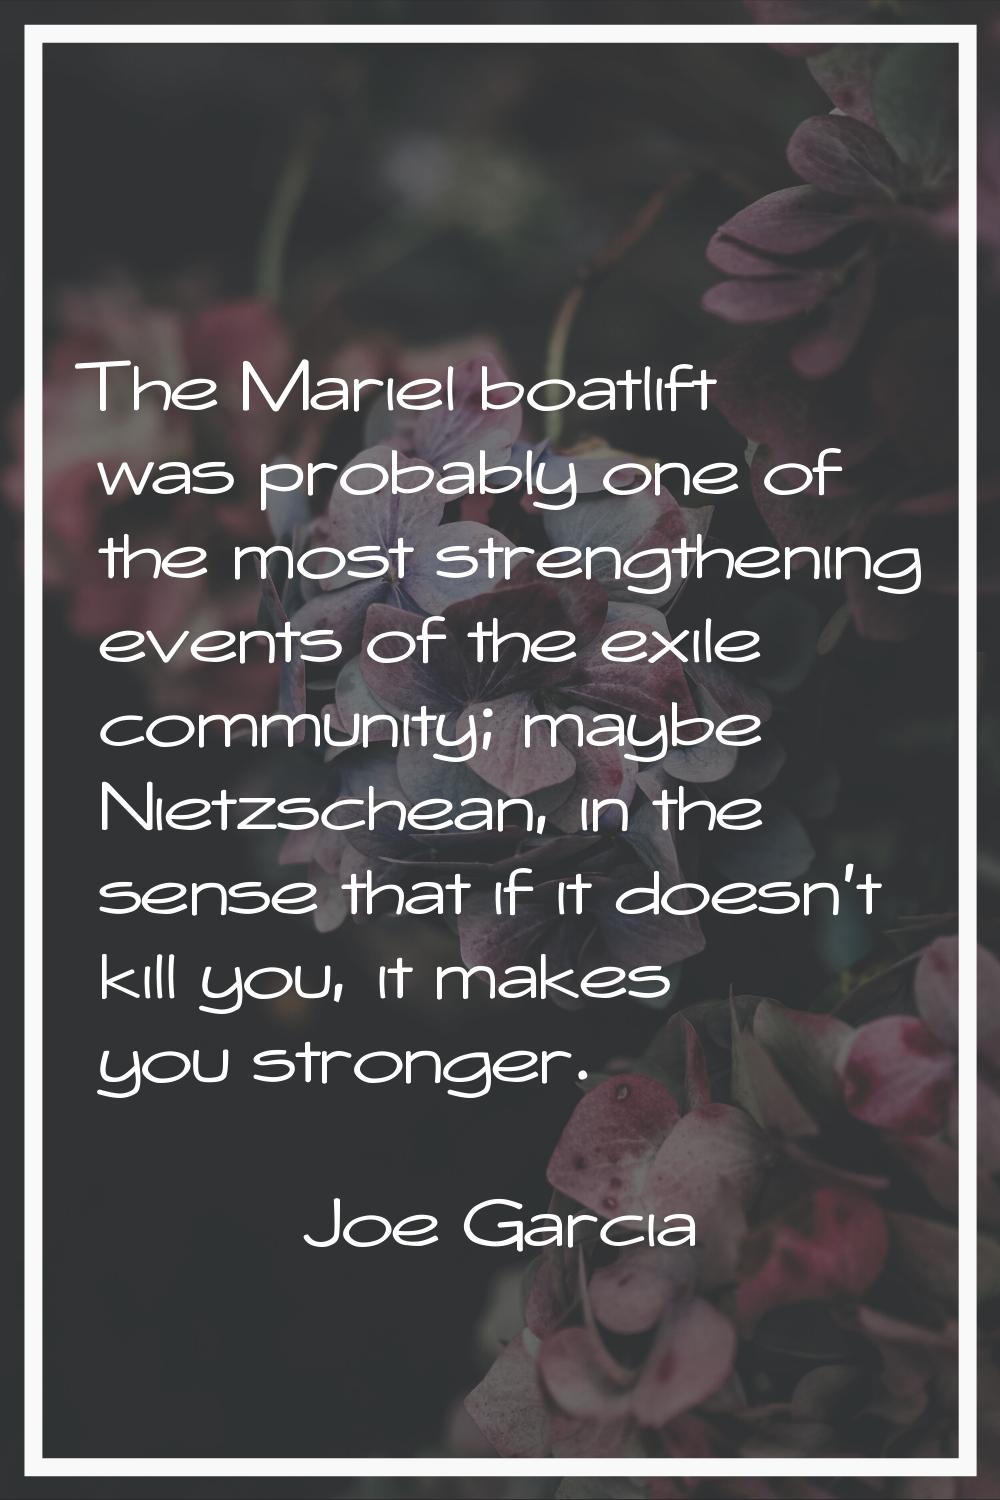 The Mariel boatlift was probably one of the most strengthening events of the exile community; maybe